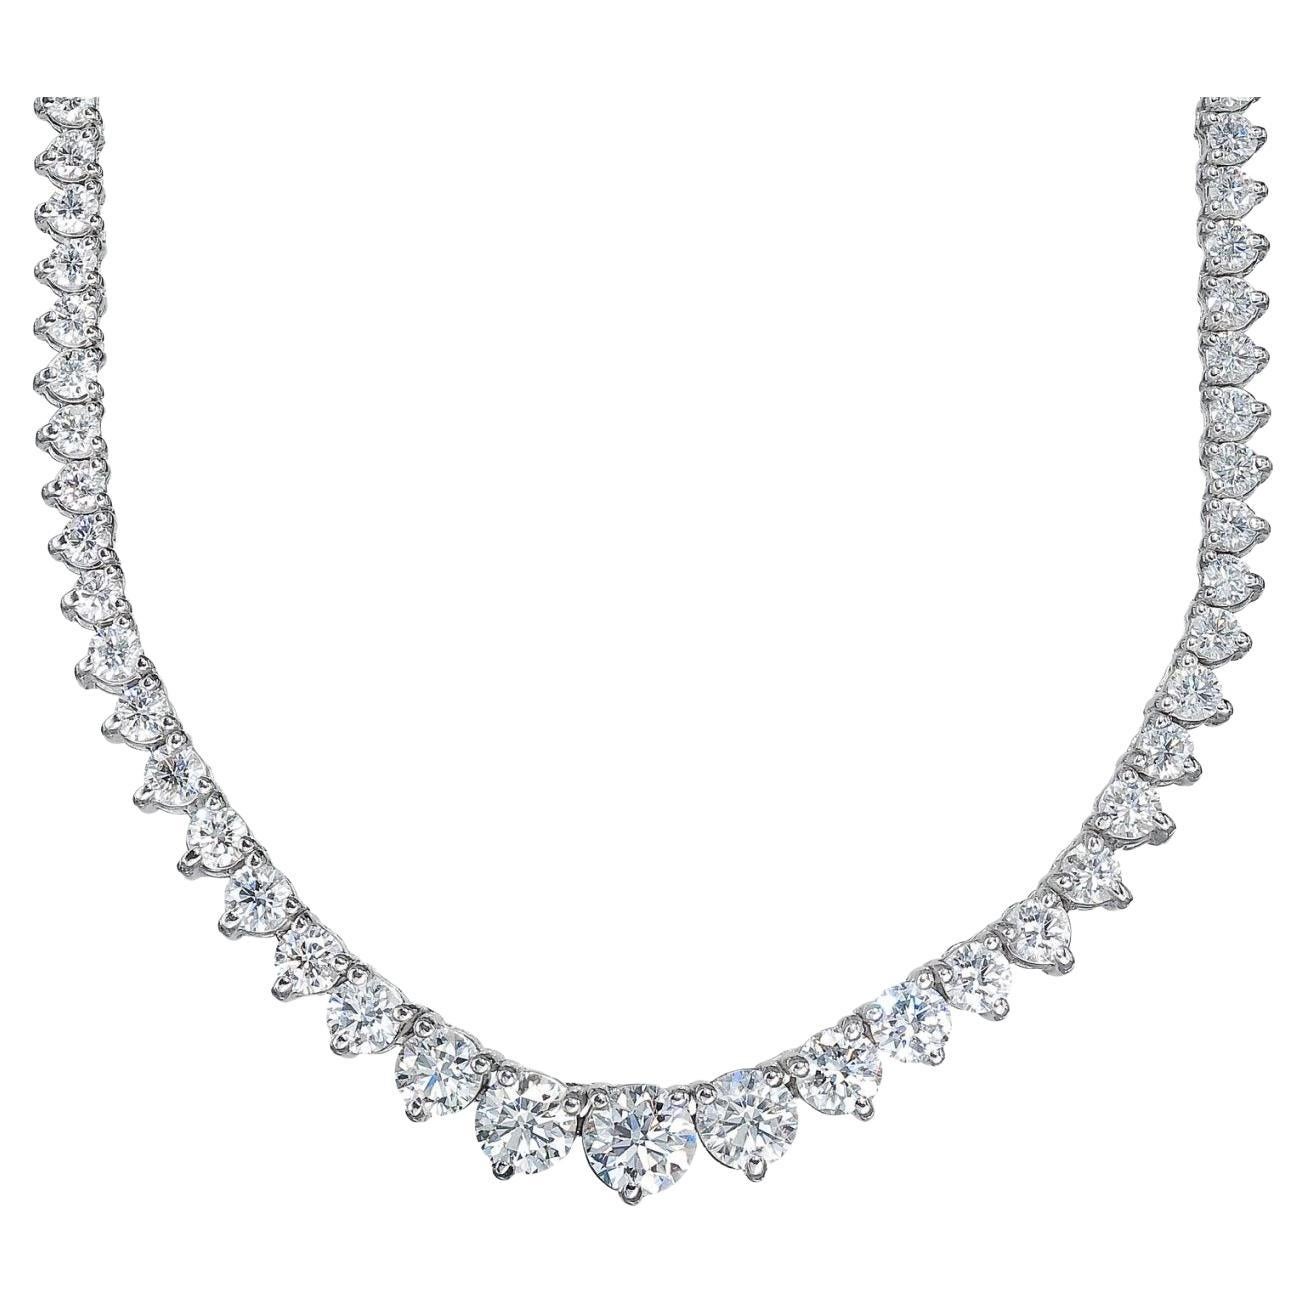 Graduated Tennis Necklace with 3-Prong Round Diamonds.  D28.18ct.t.w.